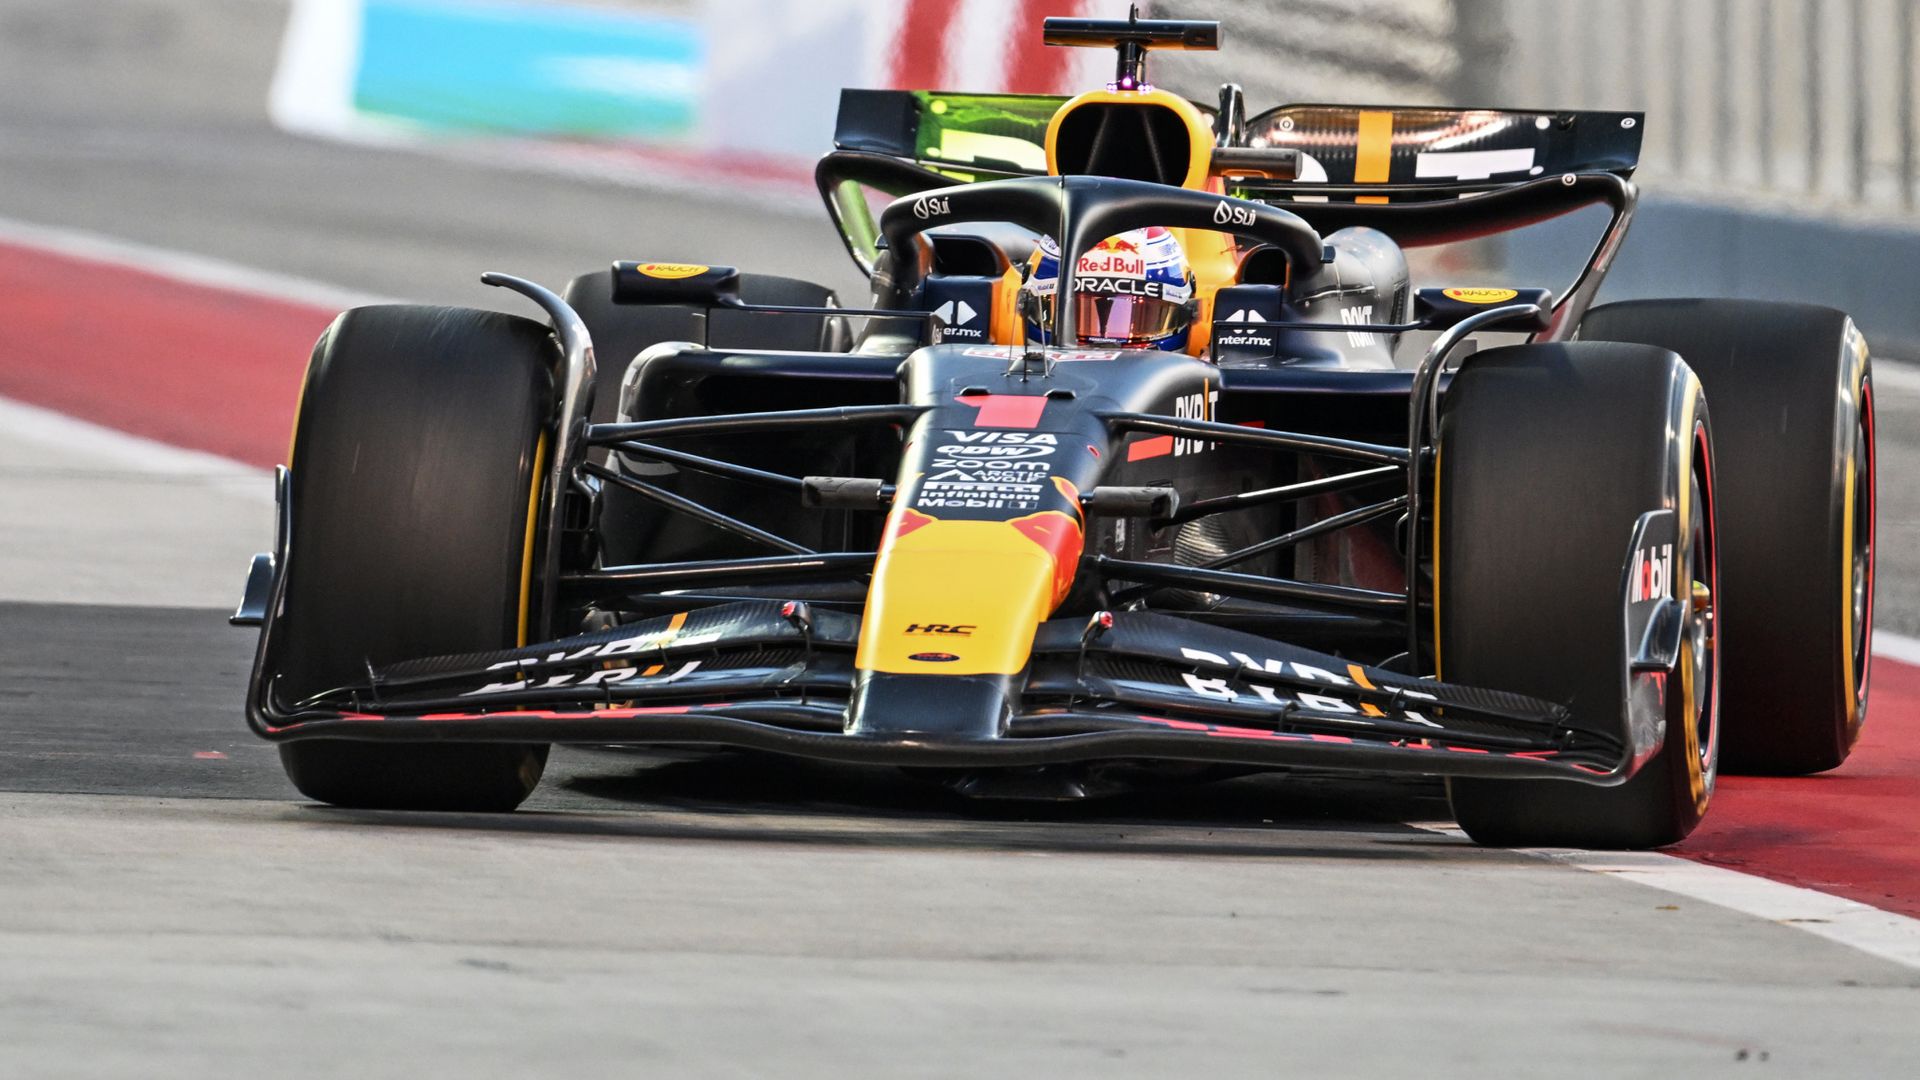 Verstappen impresses in new Red Bull with Norris second at testing